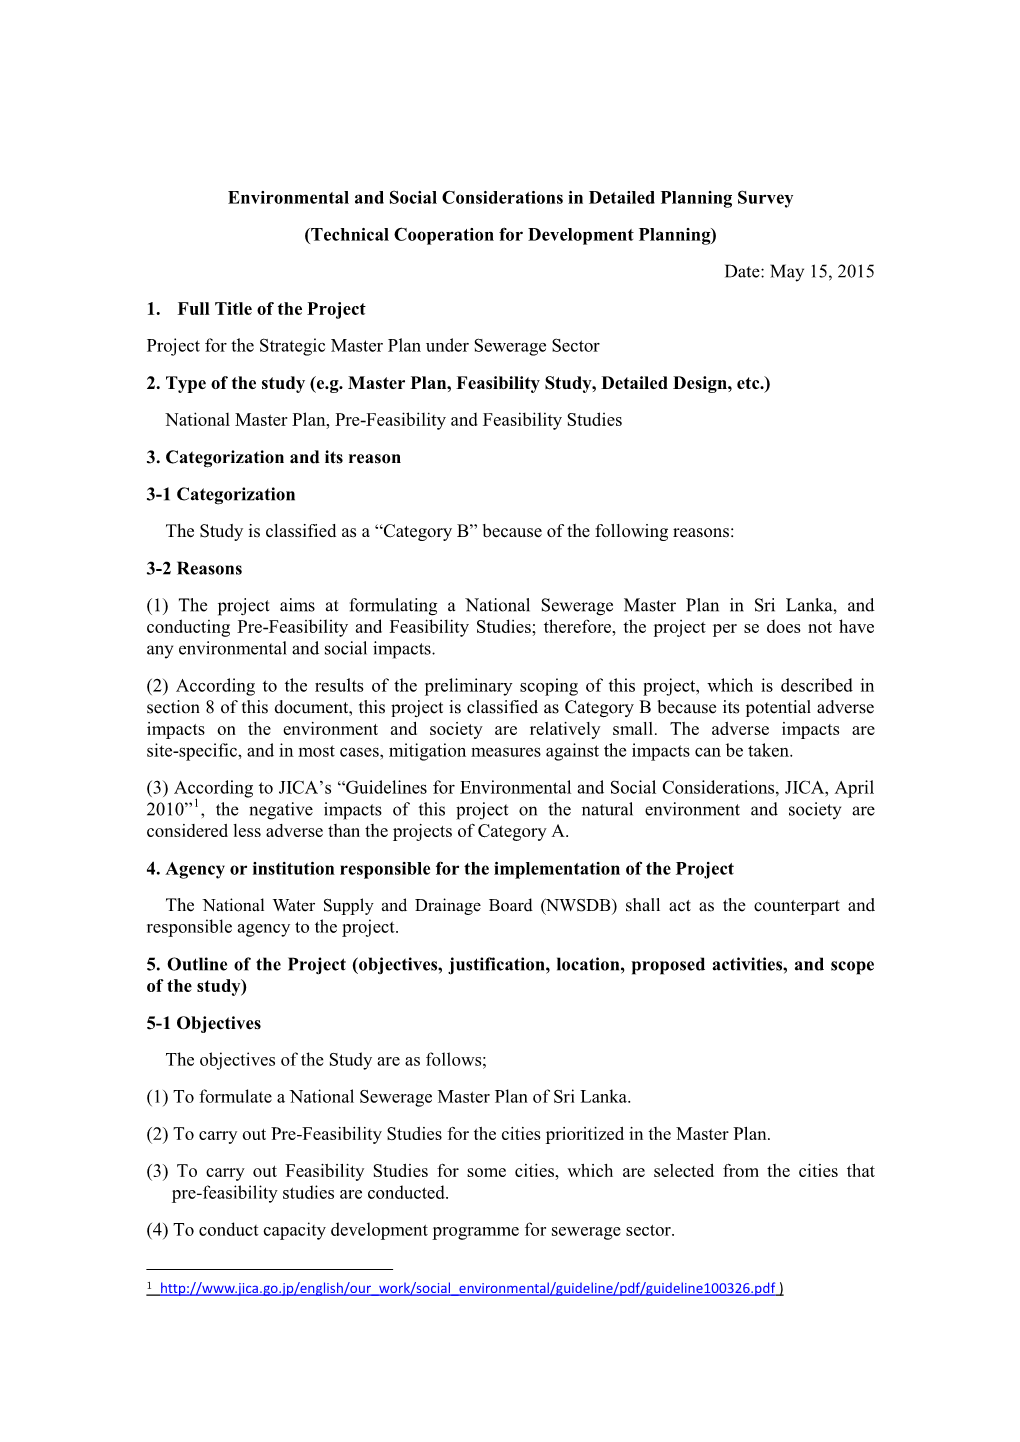 Environmental and Social Considerations in Detailed Planning Survey (Technical Cooperation for Development Planning) Date: May 15, 2015 1